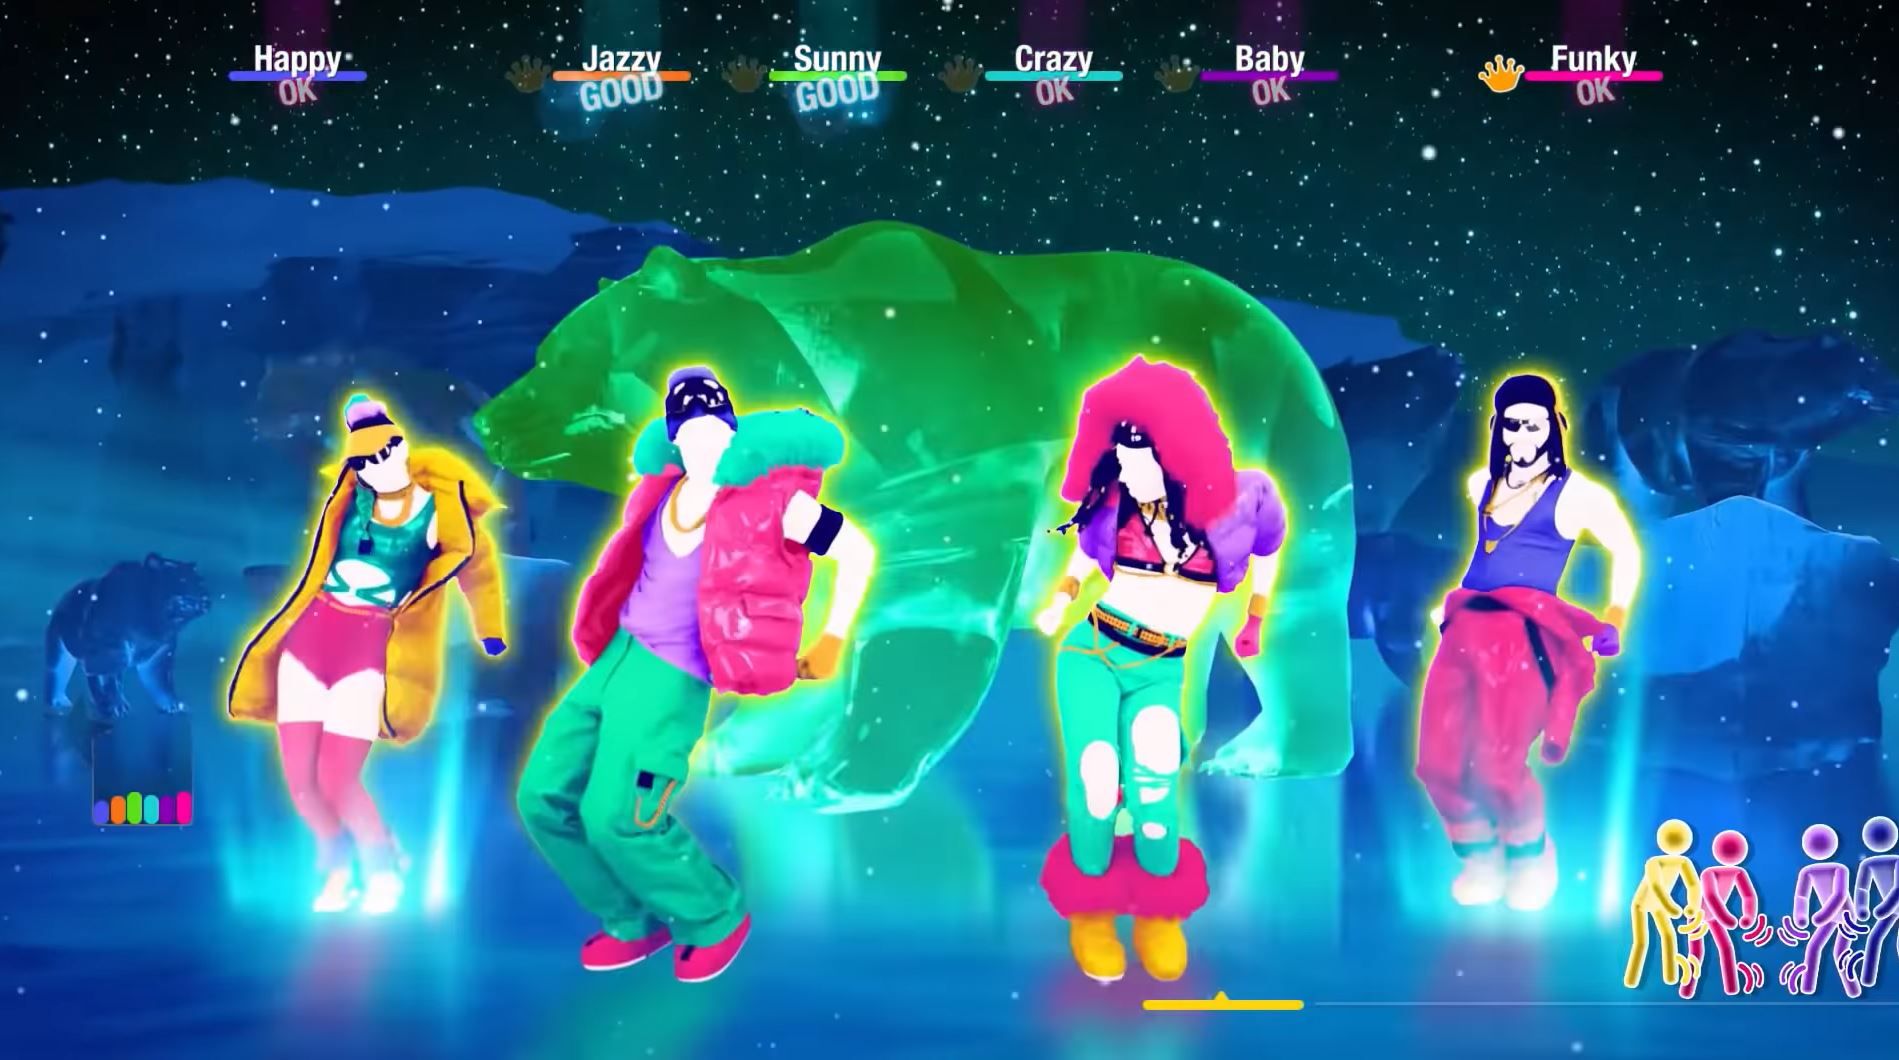 Just Dance 2021 Announced For November Release, Available On PS5 At Console Launch